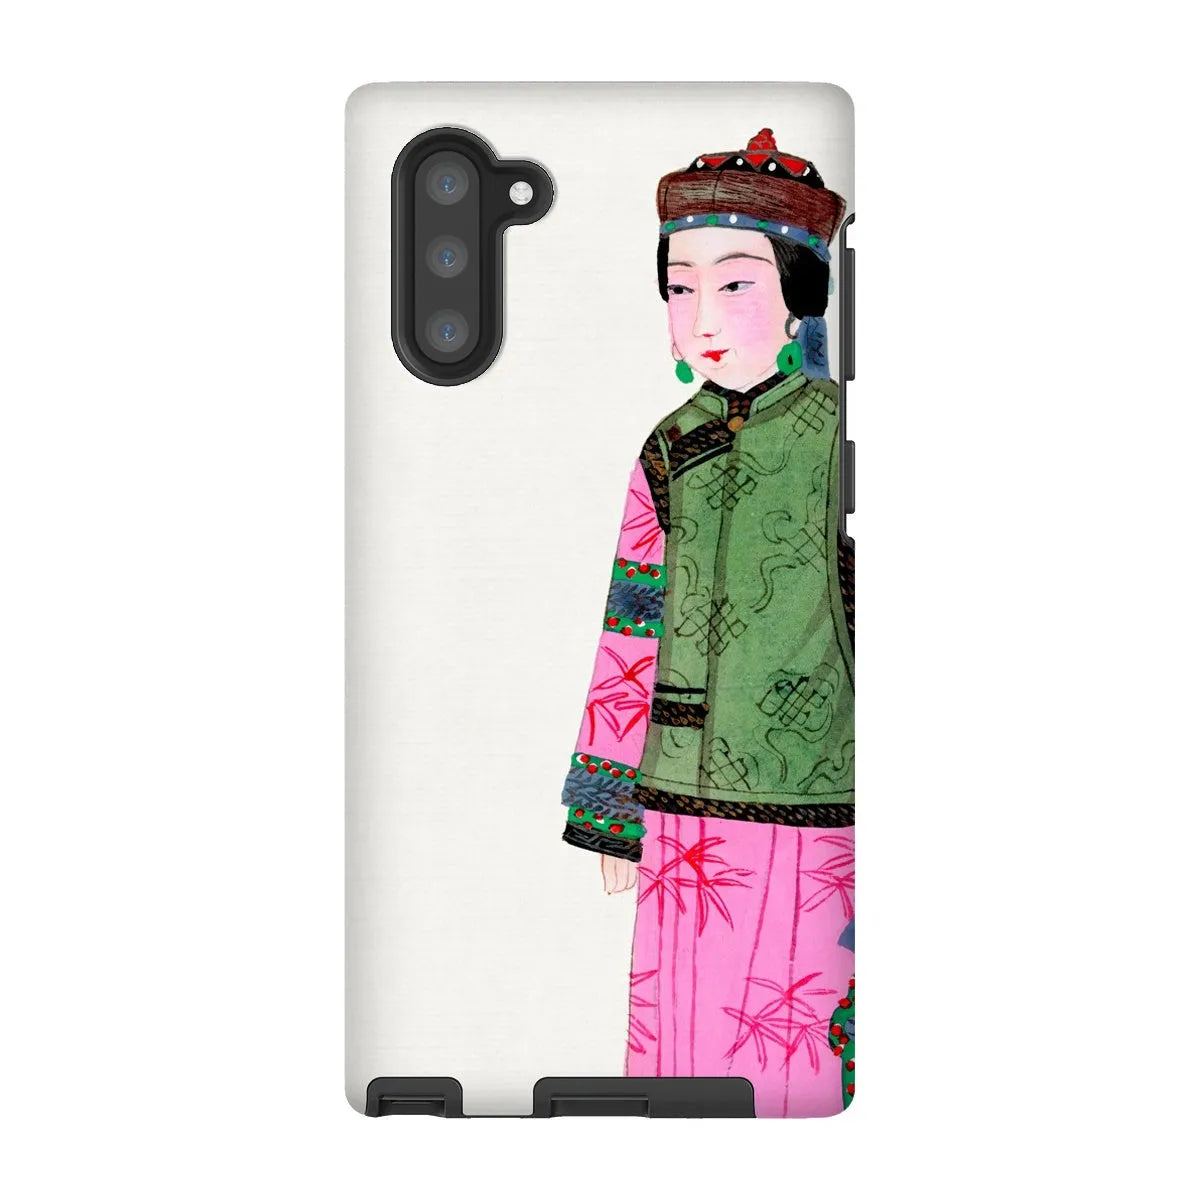 Noblewoman In Winter - Chinese Aesthetic Art Phone Case - Samsung Galaxy Note 10 / Matte - Mobile Phone Cases